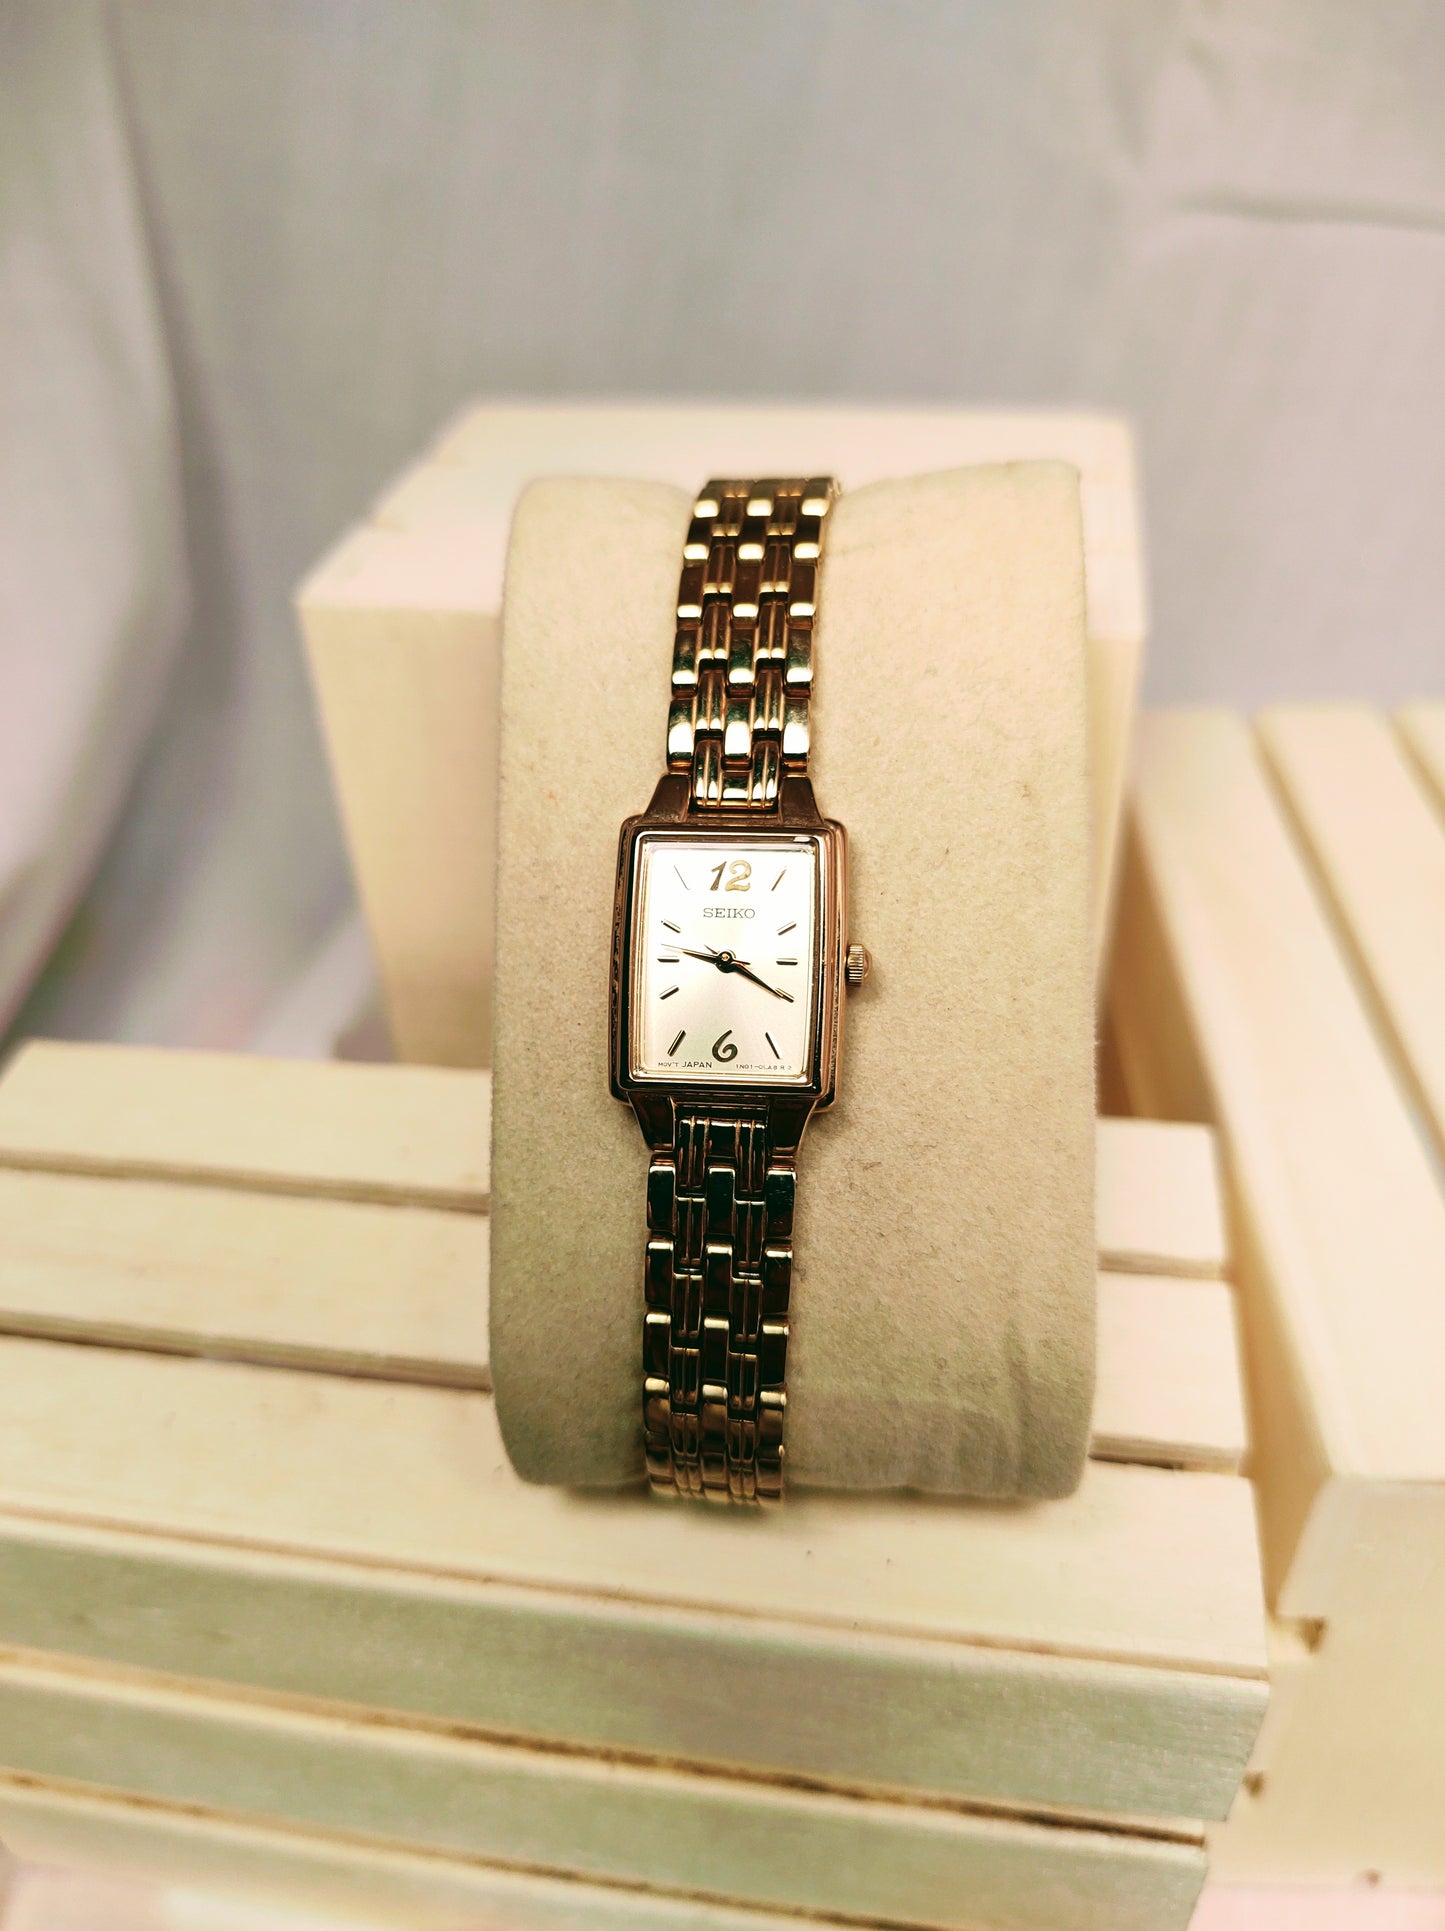 Seiko pre-owned Quartz ladies casual ...gold tone case and bracelet..white dial nice watch